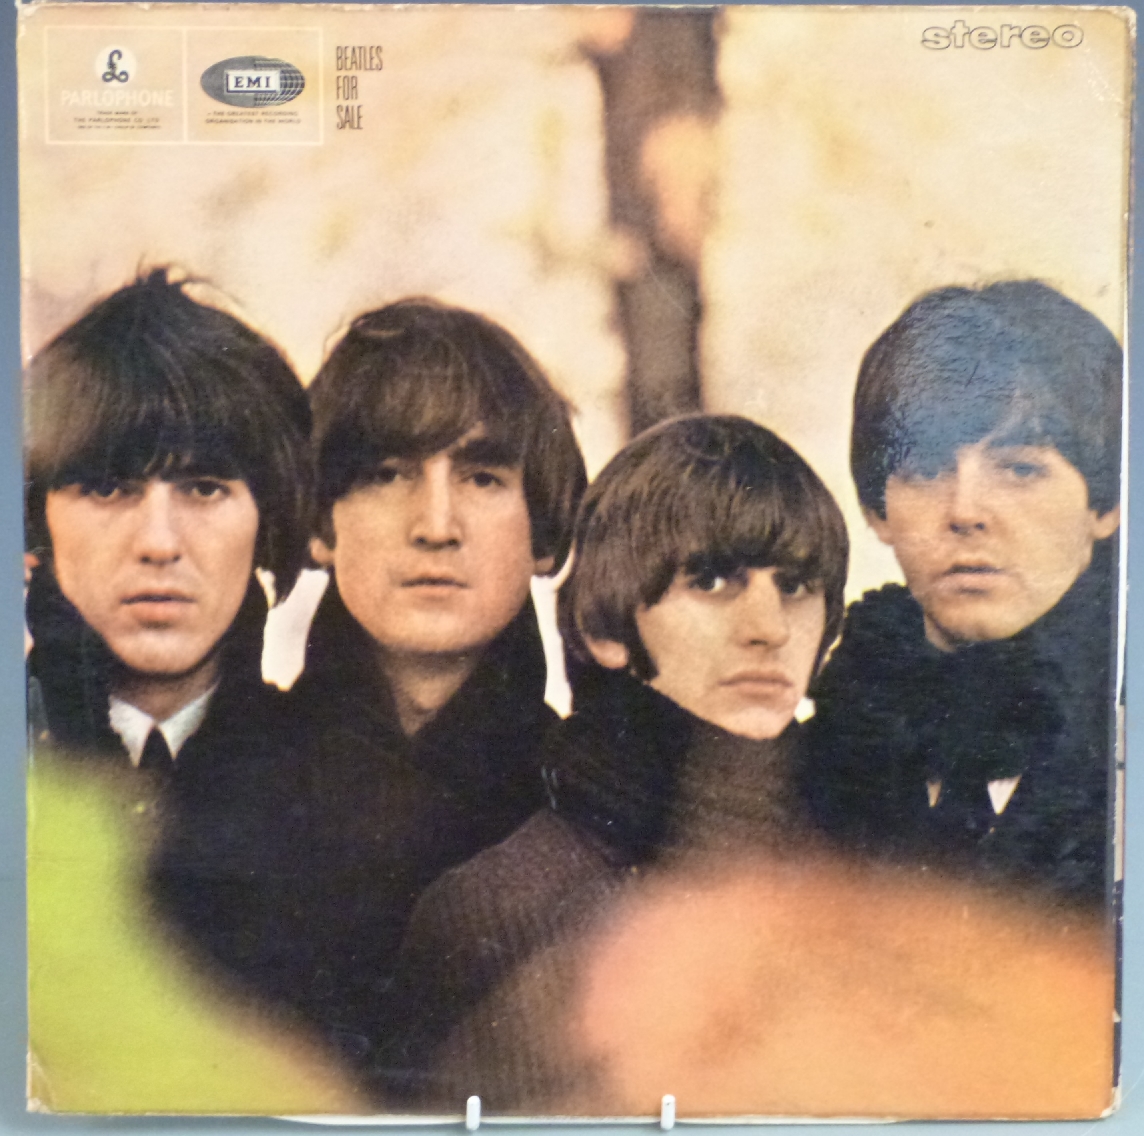 The Beatles - Beatles For Sale (PCS 3062), black and yellow labels with Sold in UK text, record